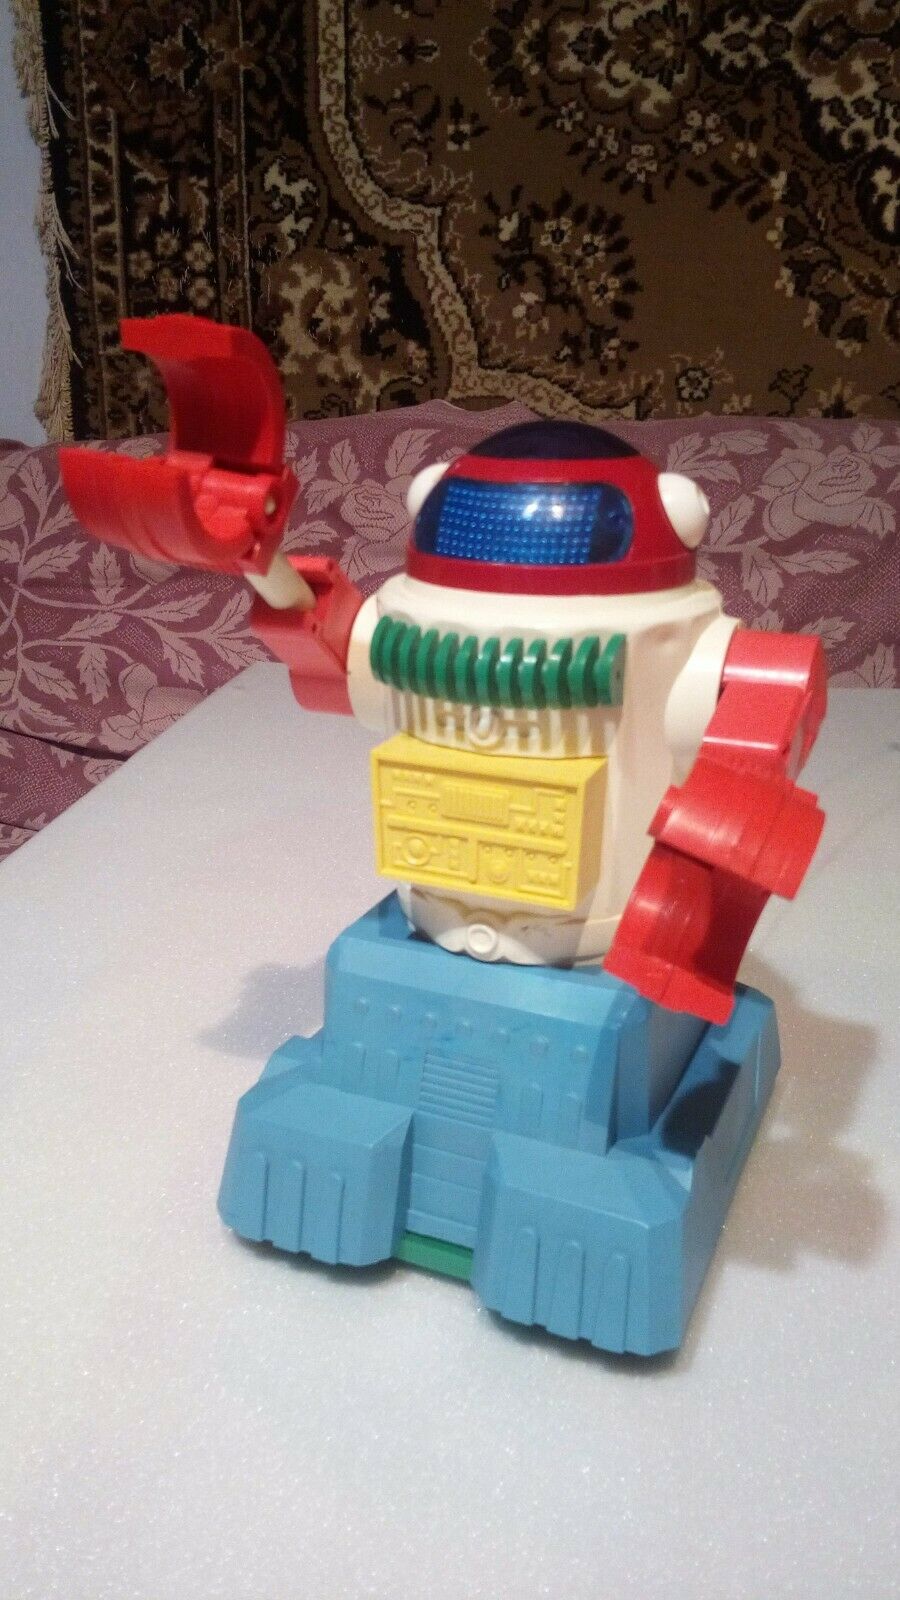 Vintage Toy Robot. Made In The Ussr In The 80s